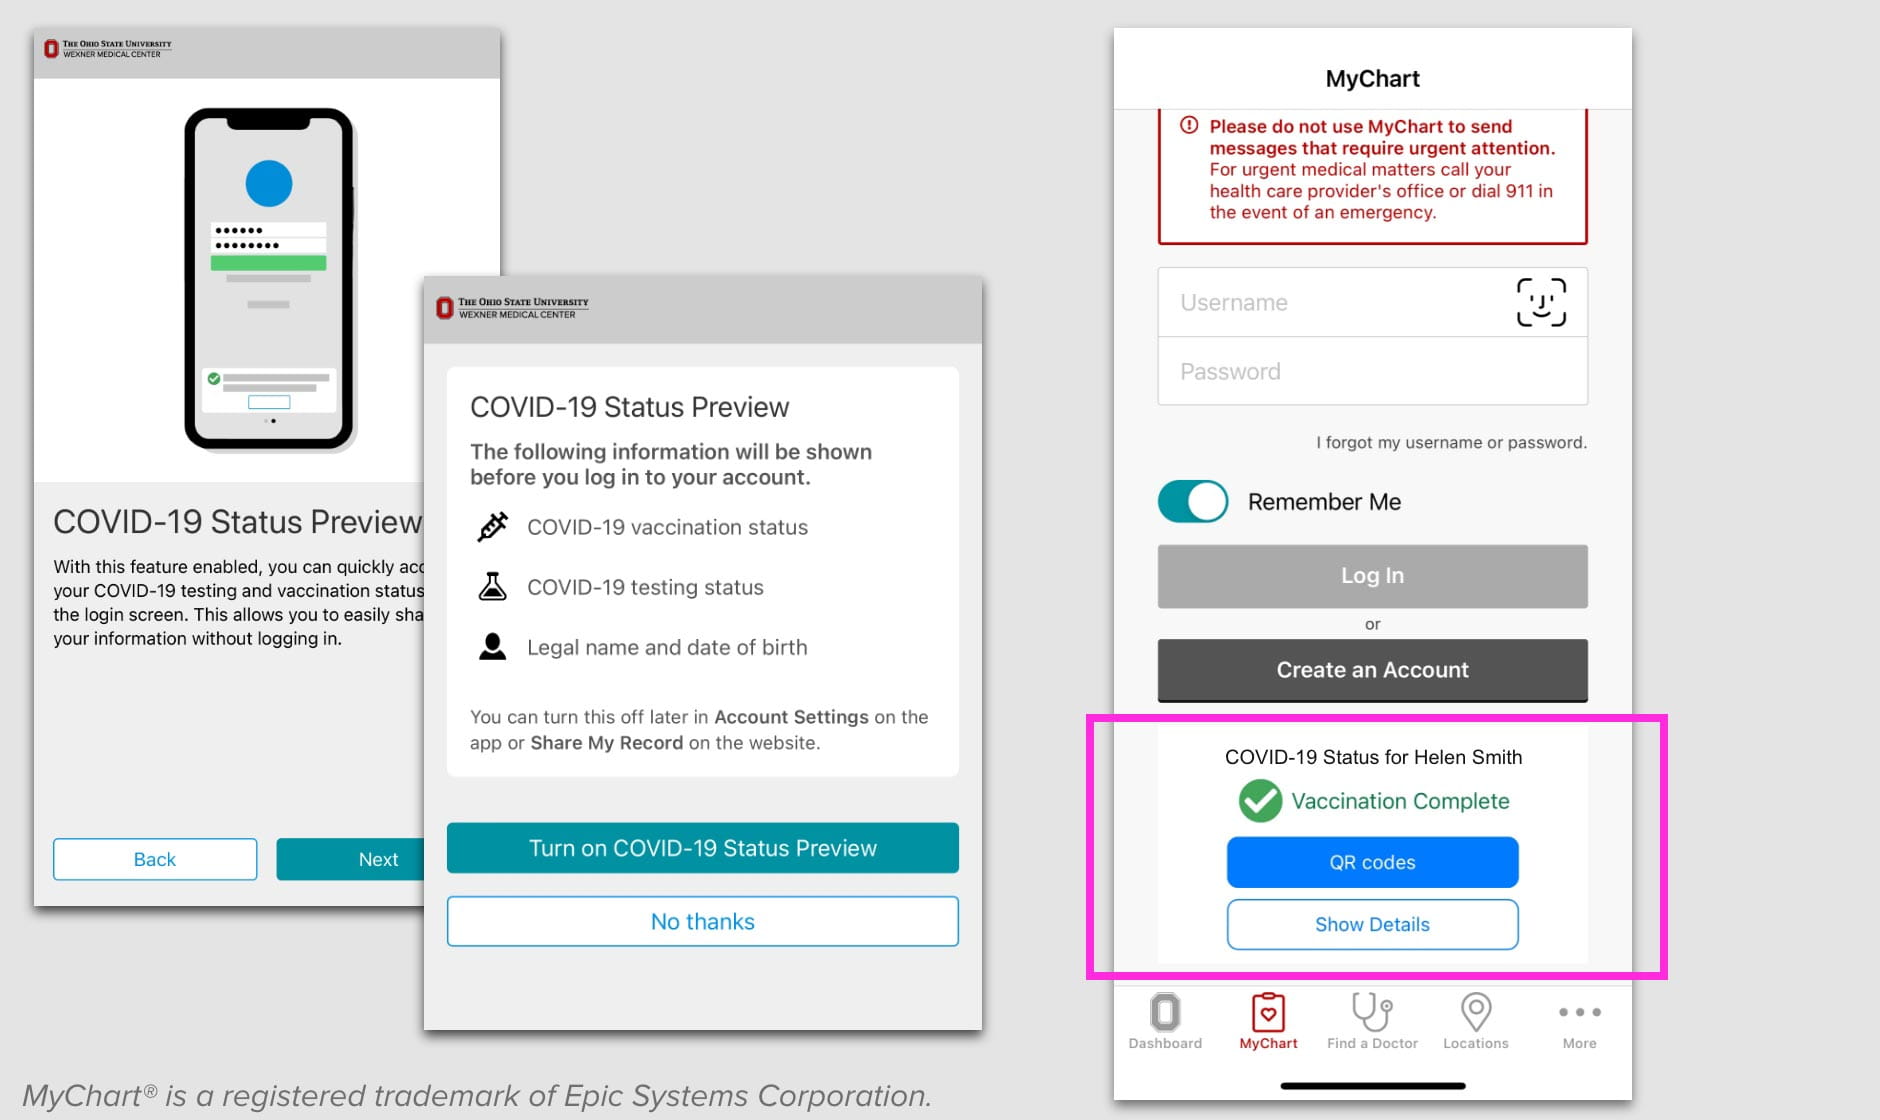 Images of the where to enable COVID status preview